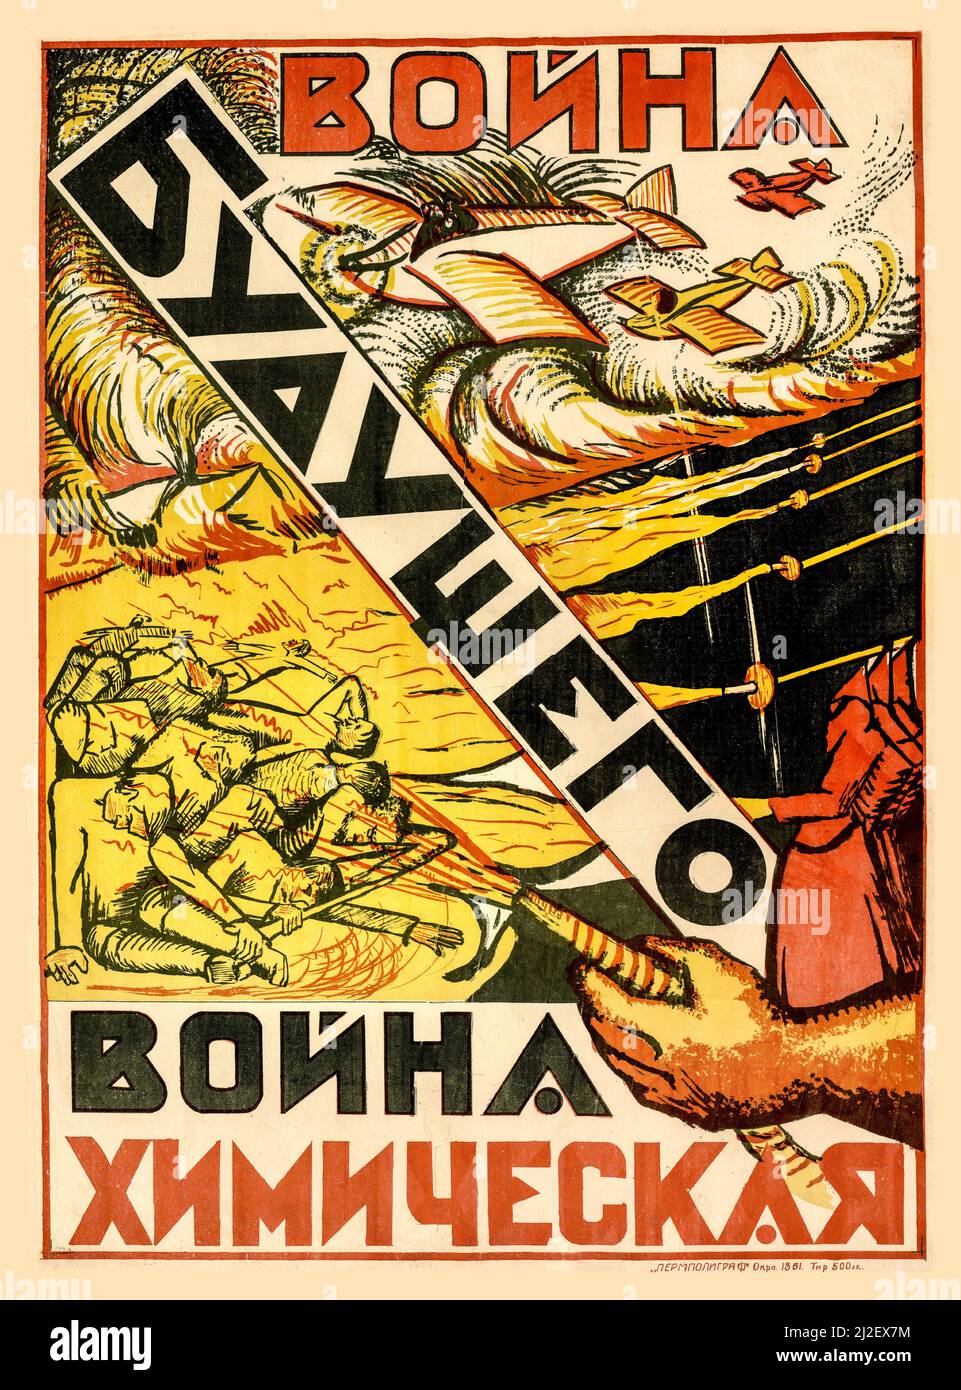 Vintage BIOLOGICAL WAR  Russian Soviet USSR 1925 Chemical / Biological warfare poster 'War of the future - chemical war': [poster]. -  [1925]  Showing a hand spraying chemicals onto a group of people. In background an aircraft spraying clouds of noxious gases.  Permpolygraph Color lithography, Stock Photo